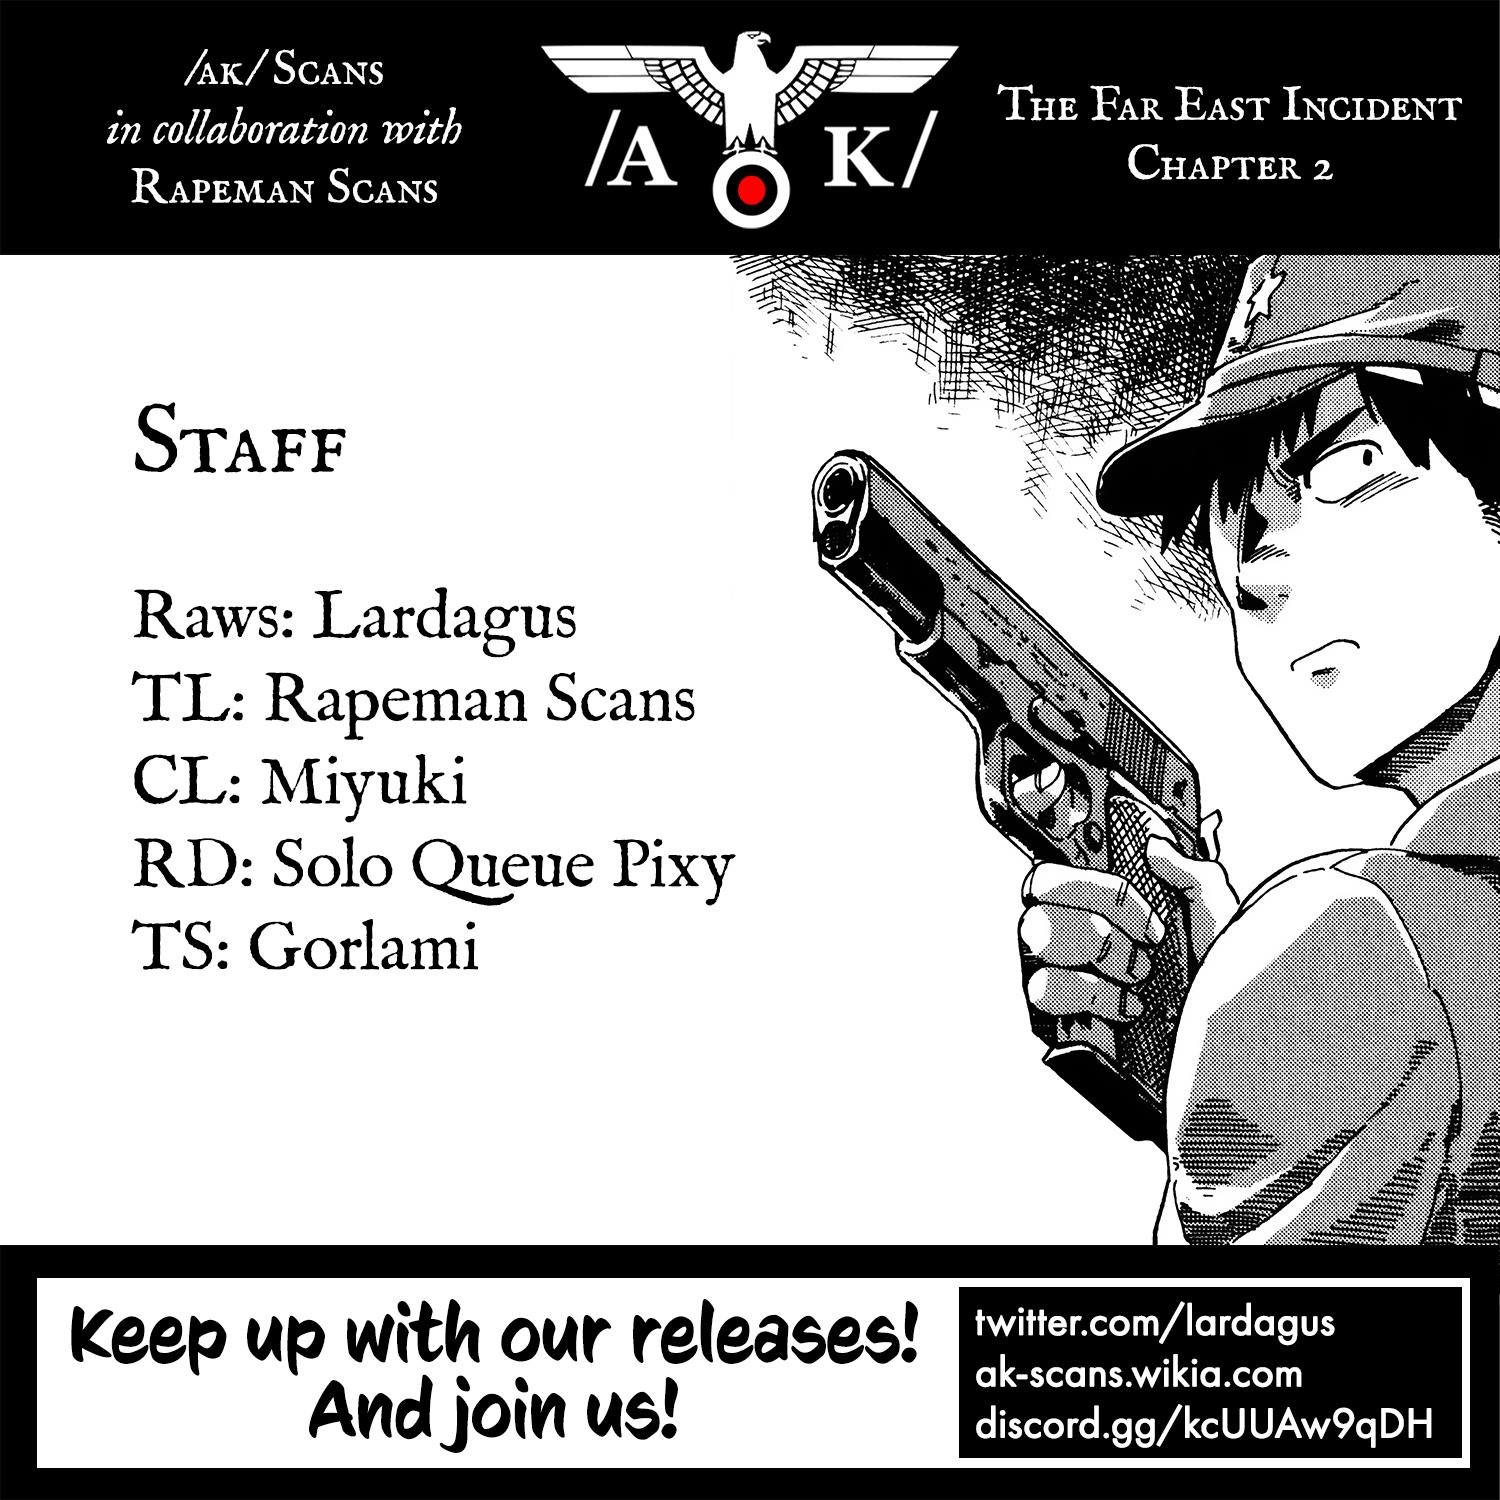 The Far East Incident Chapter 2 #44